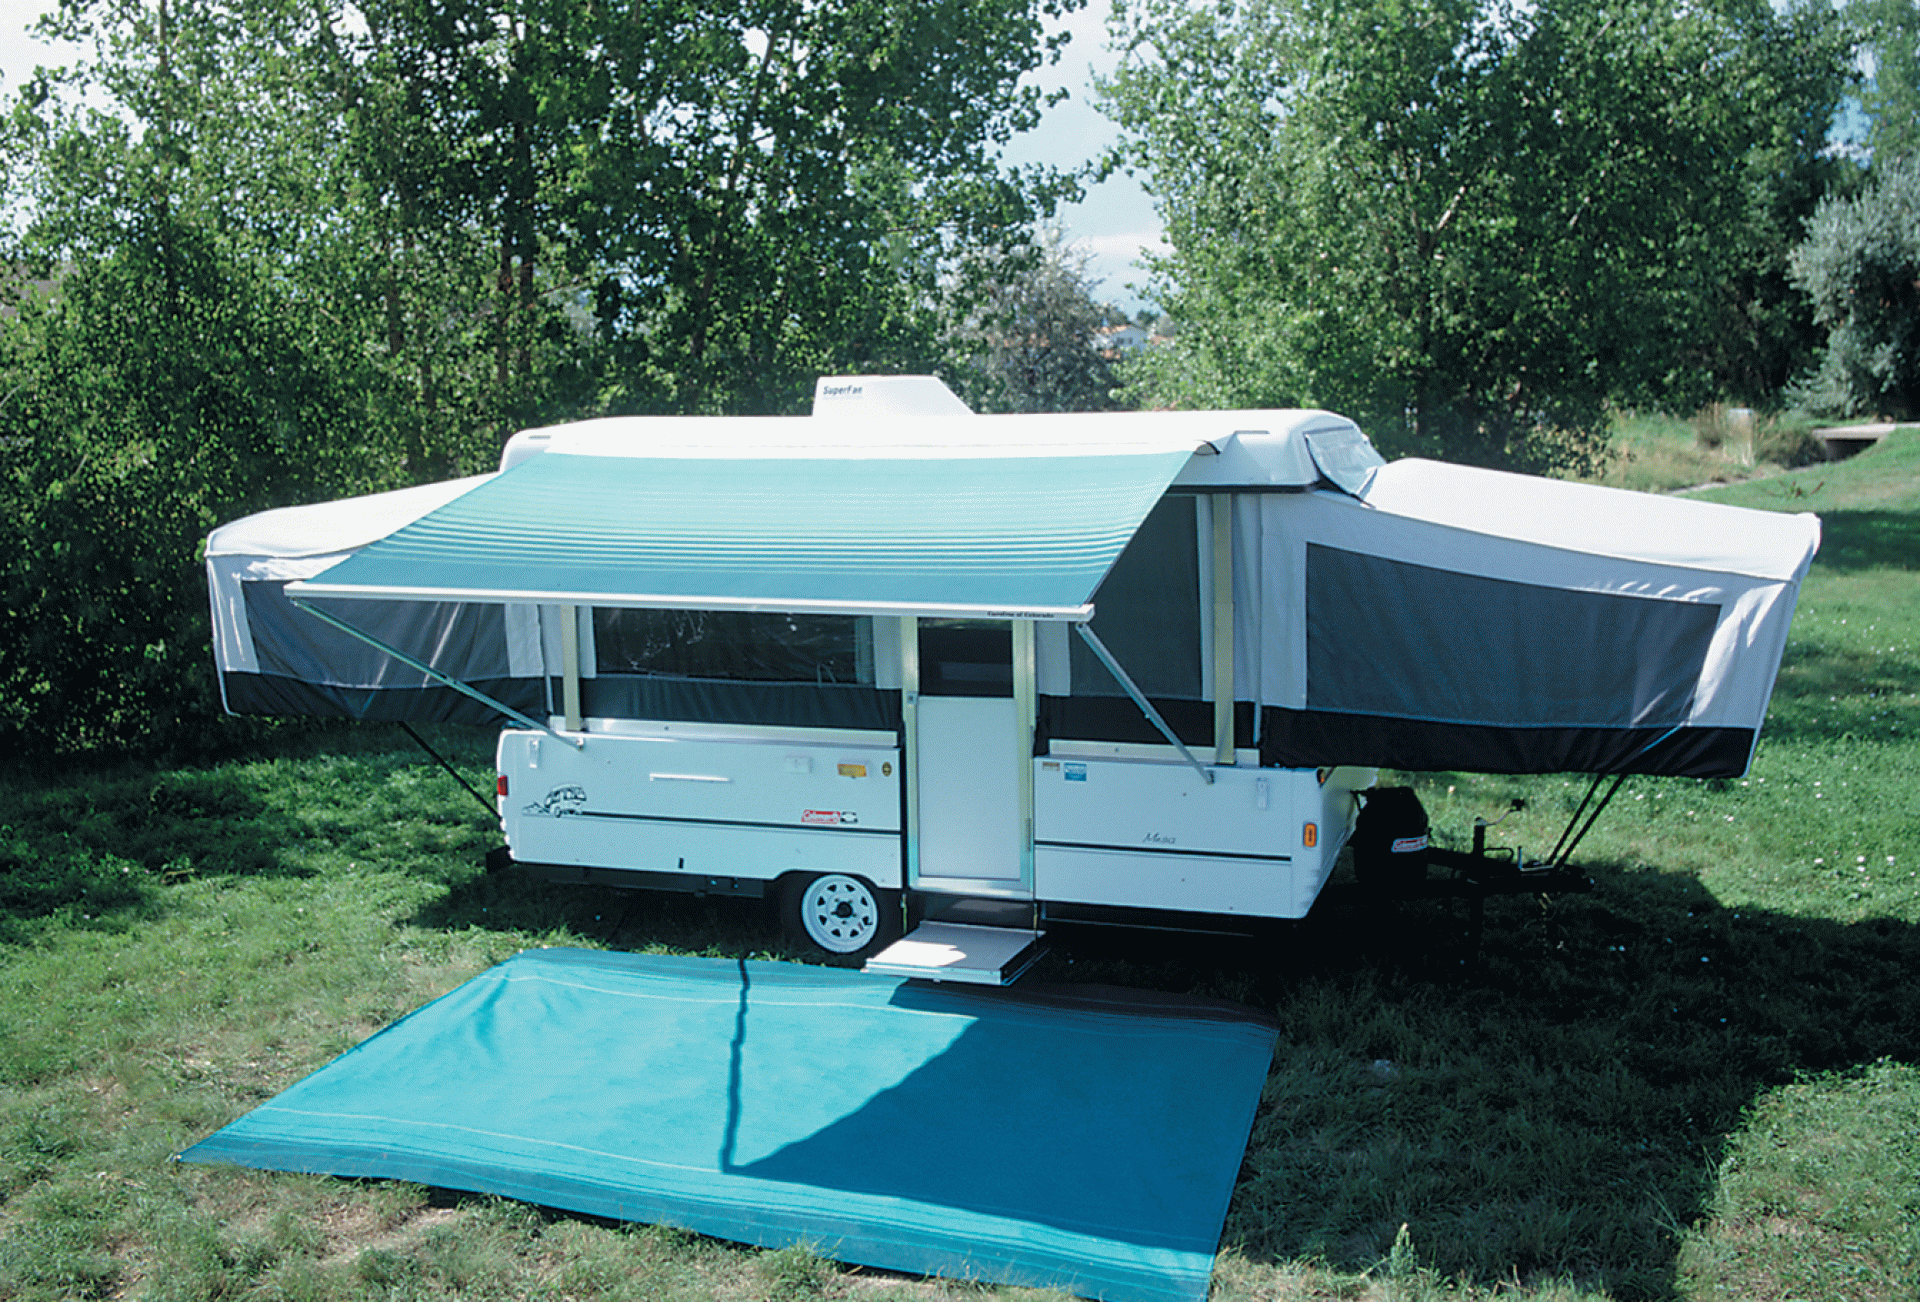 CAREFREE OF COLORADO | 981185200 | Campout Awning 3.0 Metric 9' 10" Sierra Brown with White Bag